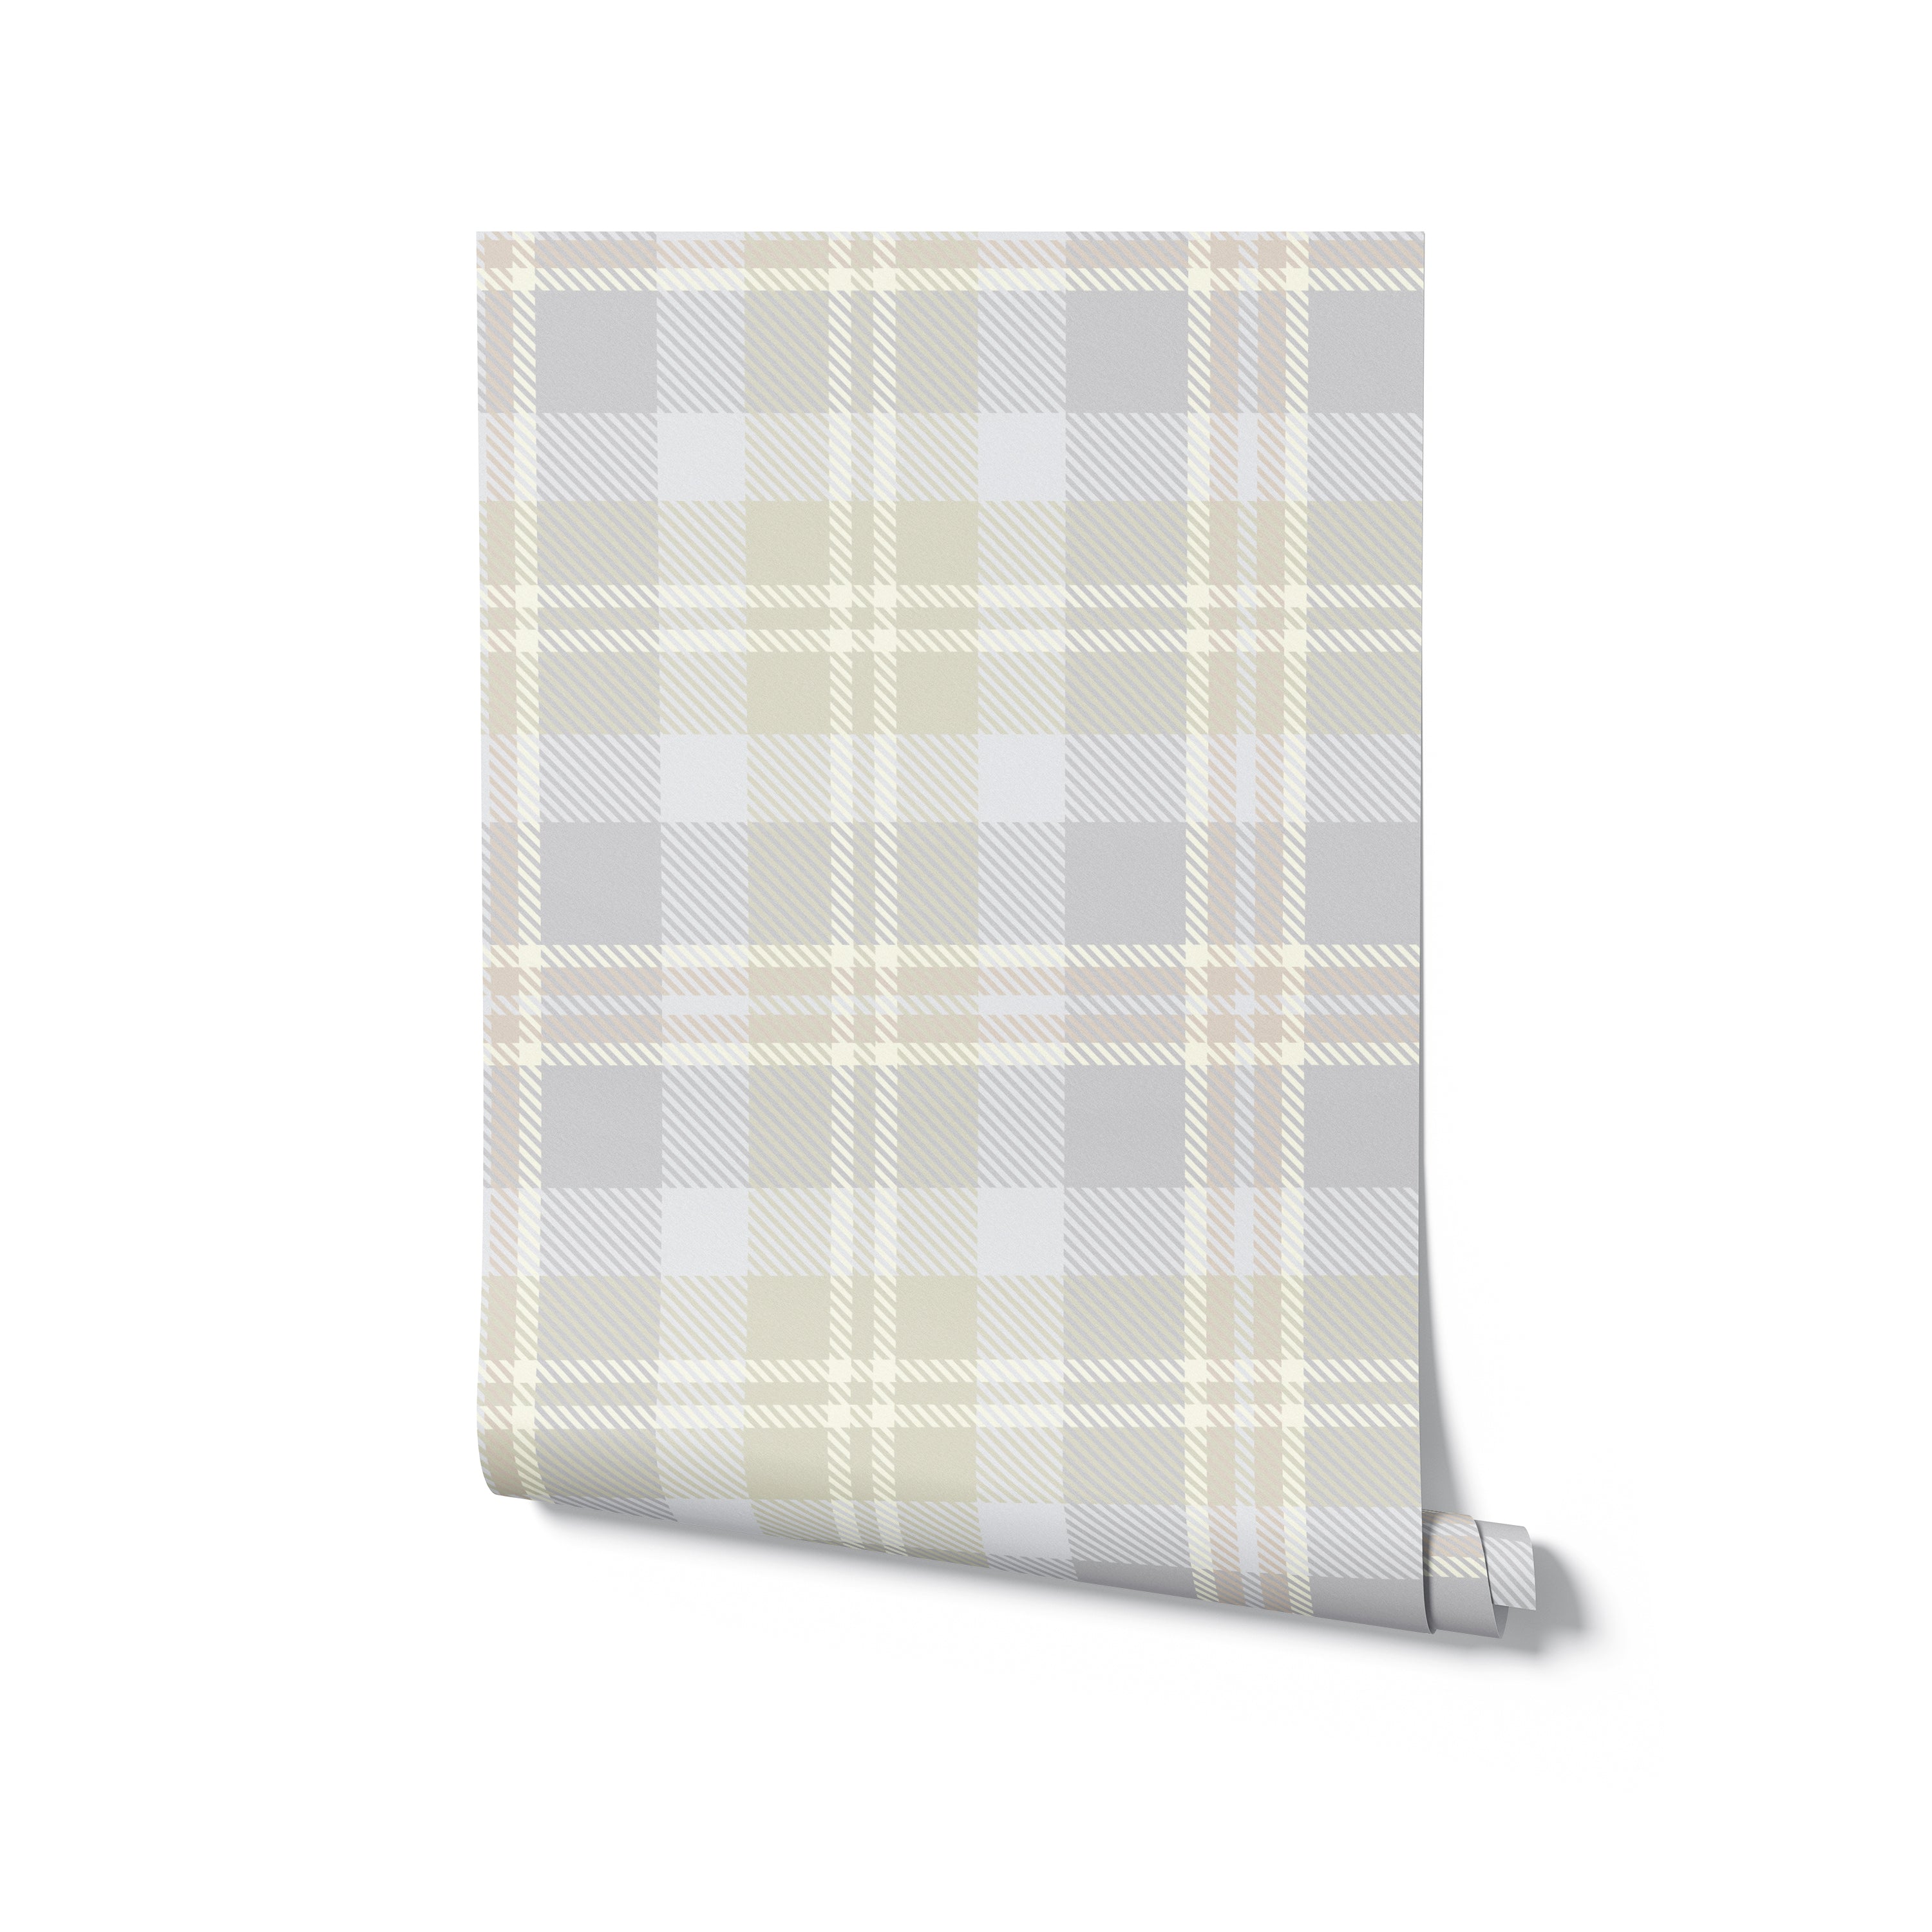 Sample roll of Heirloom Tartan Plaid Wallpaper, featuring a classic tartan pattern in shades of gray, beige, and white. Ideal for adding a touch of traditional charm to any room.